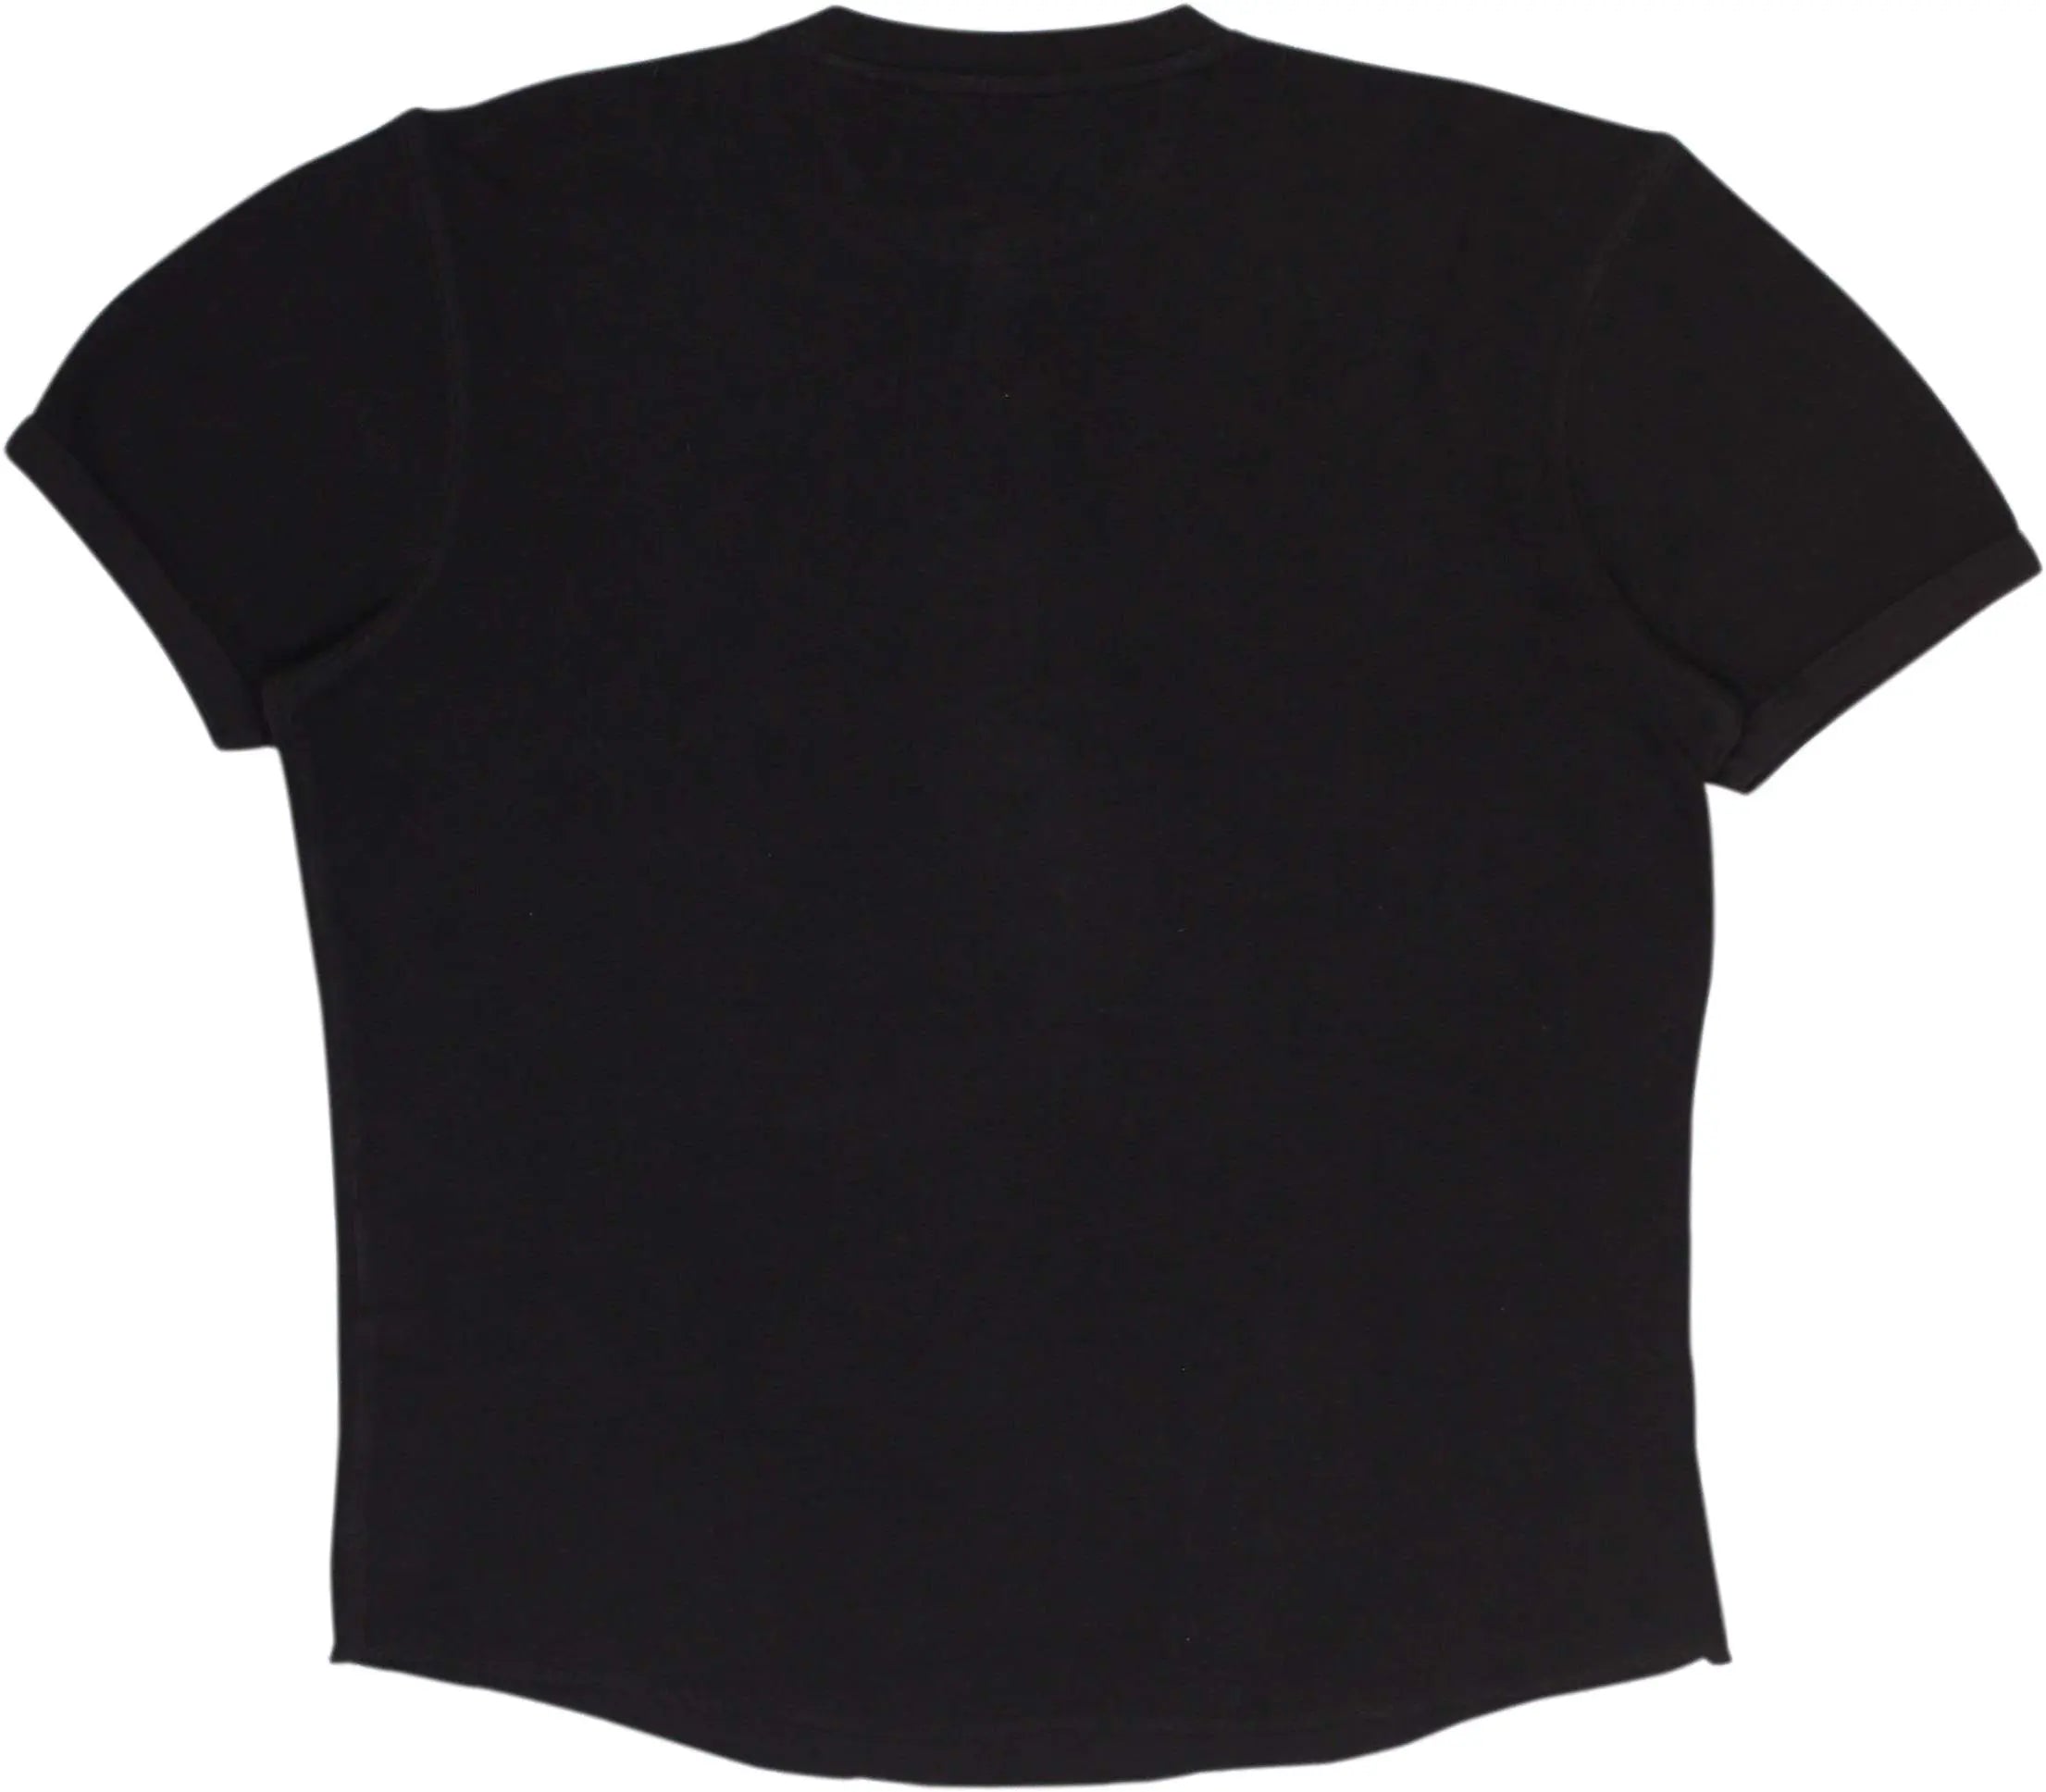 Levi's - Black T-shirt by Levi's- ThriftTale.com - Vintage and second handclothing